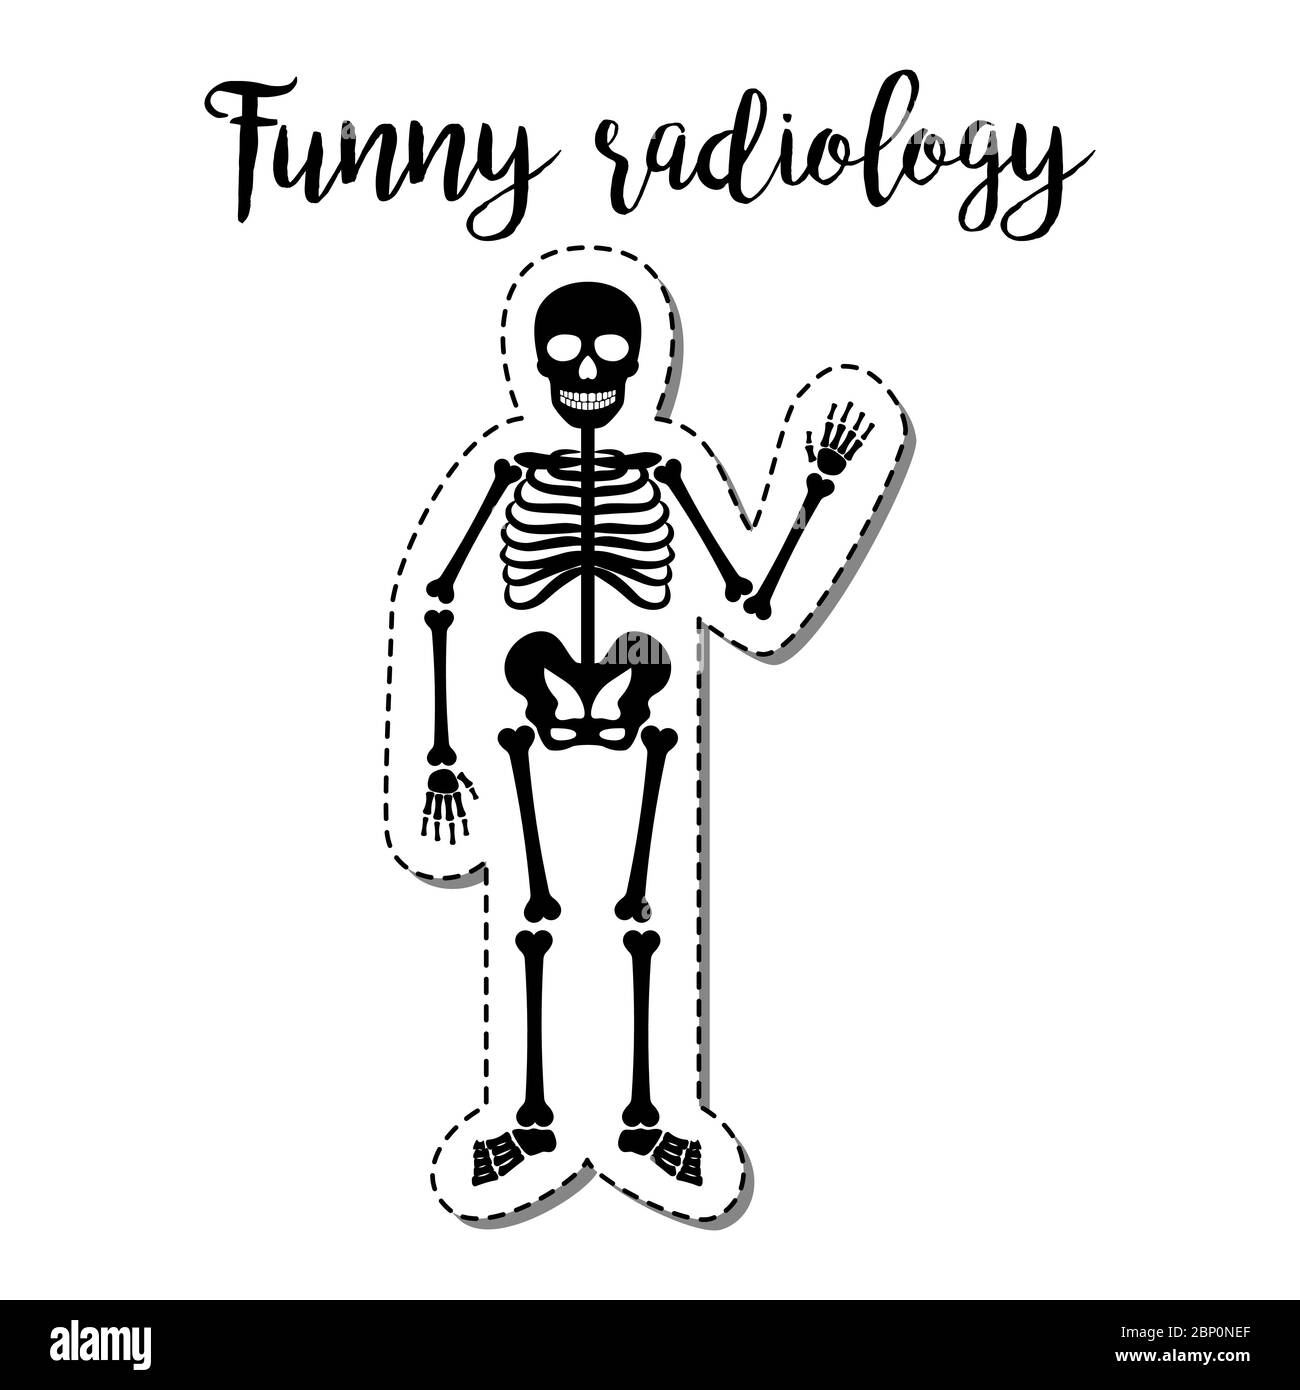 Fashion patch element with quote, Funny radiology and skeleton vector illustraion Stock Vector